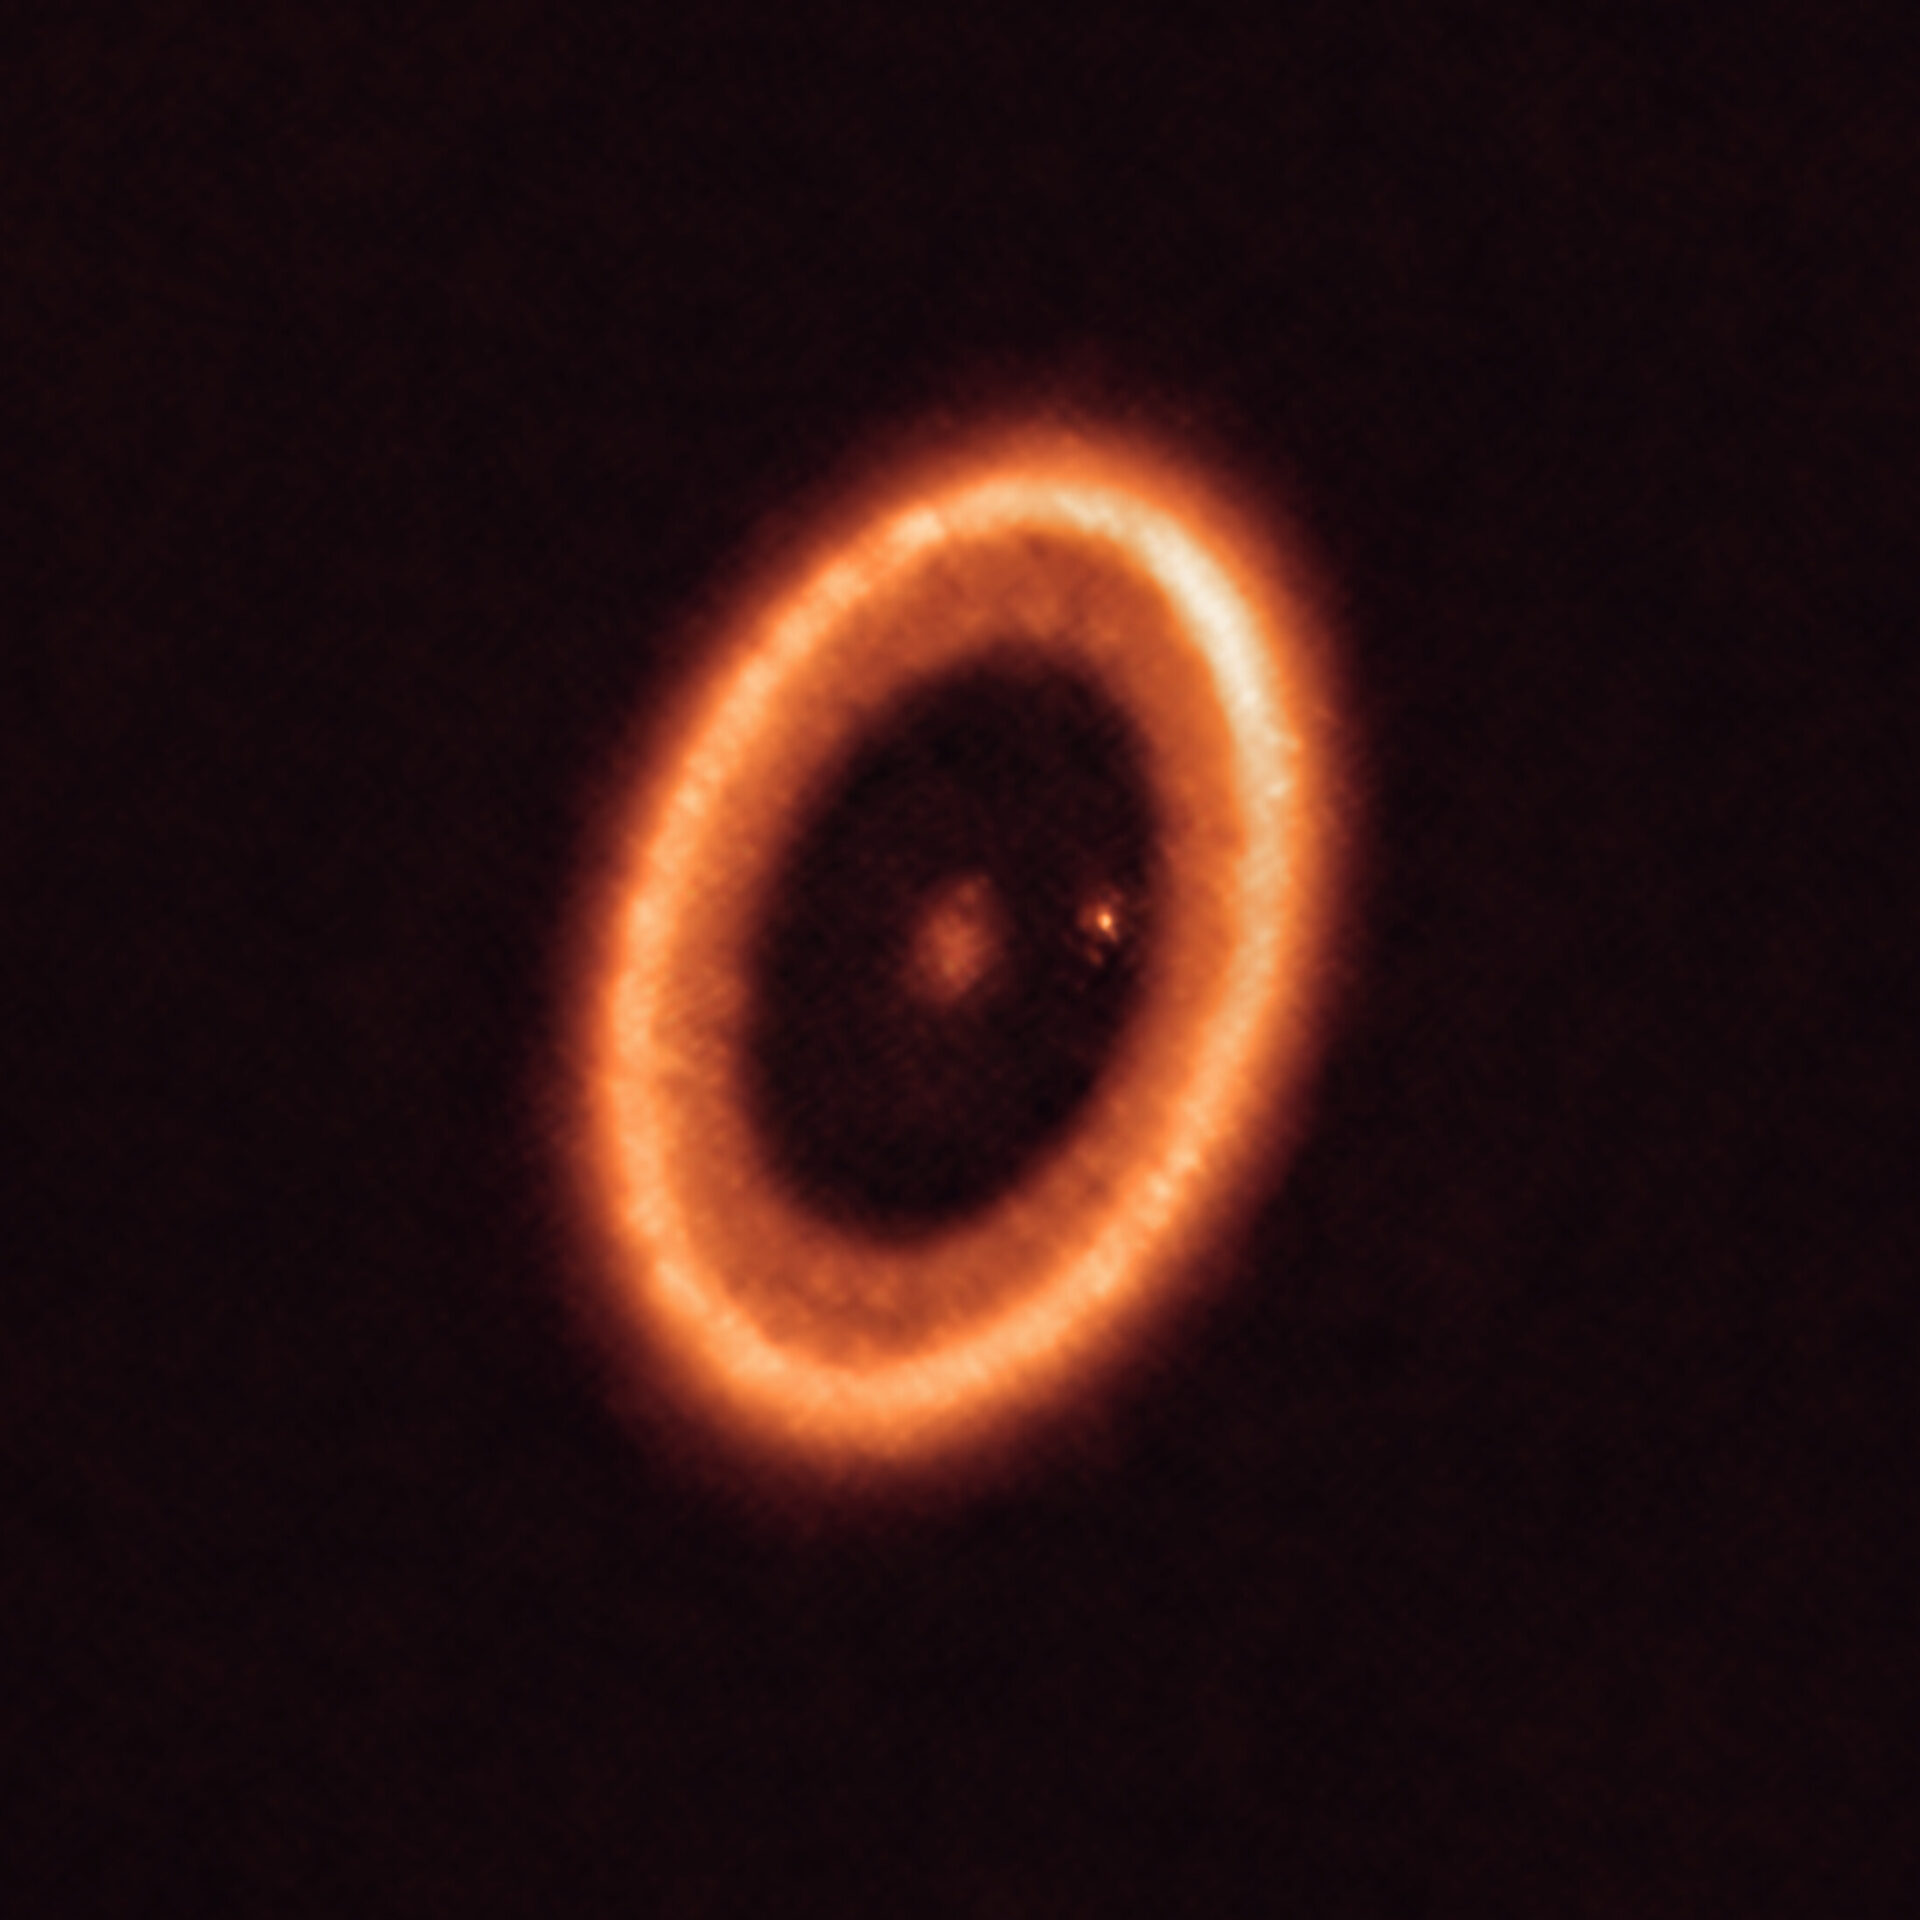 This image, taken with the Atacama Large Millimeter/submillimeter Array (ALMA), in which ESO is a partner, shows the PDS 70 system, located nearly 400 light-years away and still in the process of being formed. The system features a star at its centre and at least two planets orbiting it, PDS 70b (not visible in the image) and PDS 70c, surrounded by a circumplanetary disc (the dot to the right of the star). The planets have carved a cavity in the circumstellar disc (the ring-like structure that dominates the image) as they gobbled up material from the disc itself, growing in size. It was during this process that PDS 70c acquired its own circumplanetary disc, which contributes to the growth of the planet and where moons can form. Credit: ALMA (ESO/NAOJ/NRAO)/Benisty et al.